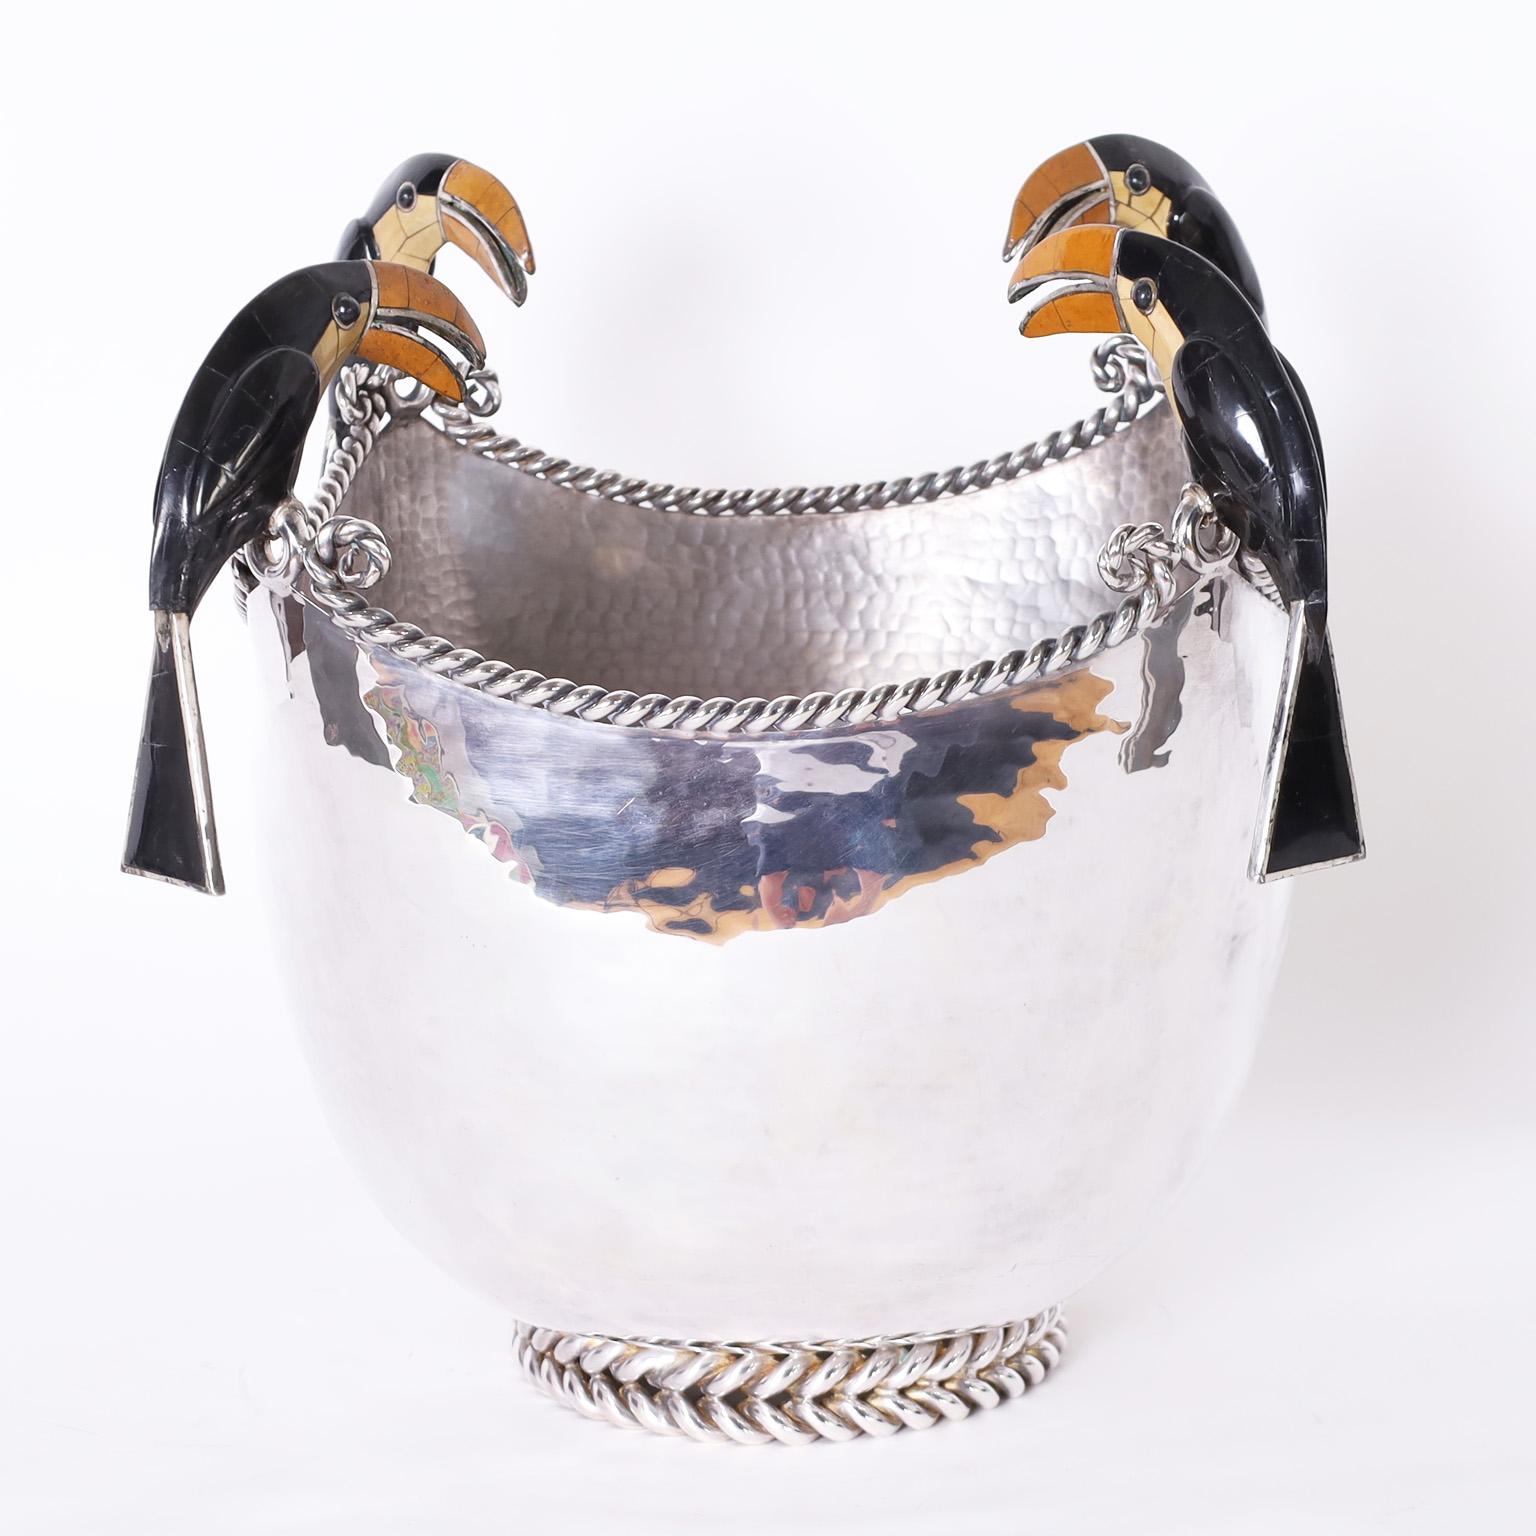 Lofty modernist bowl crafted in silver plate on copper featuring four stone clad toucans perched on the twisted metalwork lip and a jewelry like metalwork foot. Signed Emilia Castillo on the bottom.